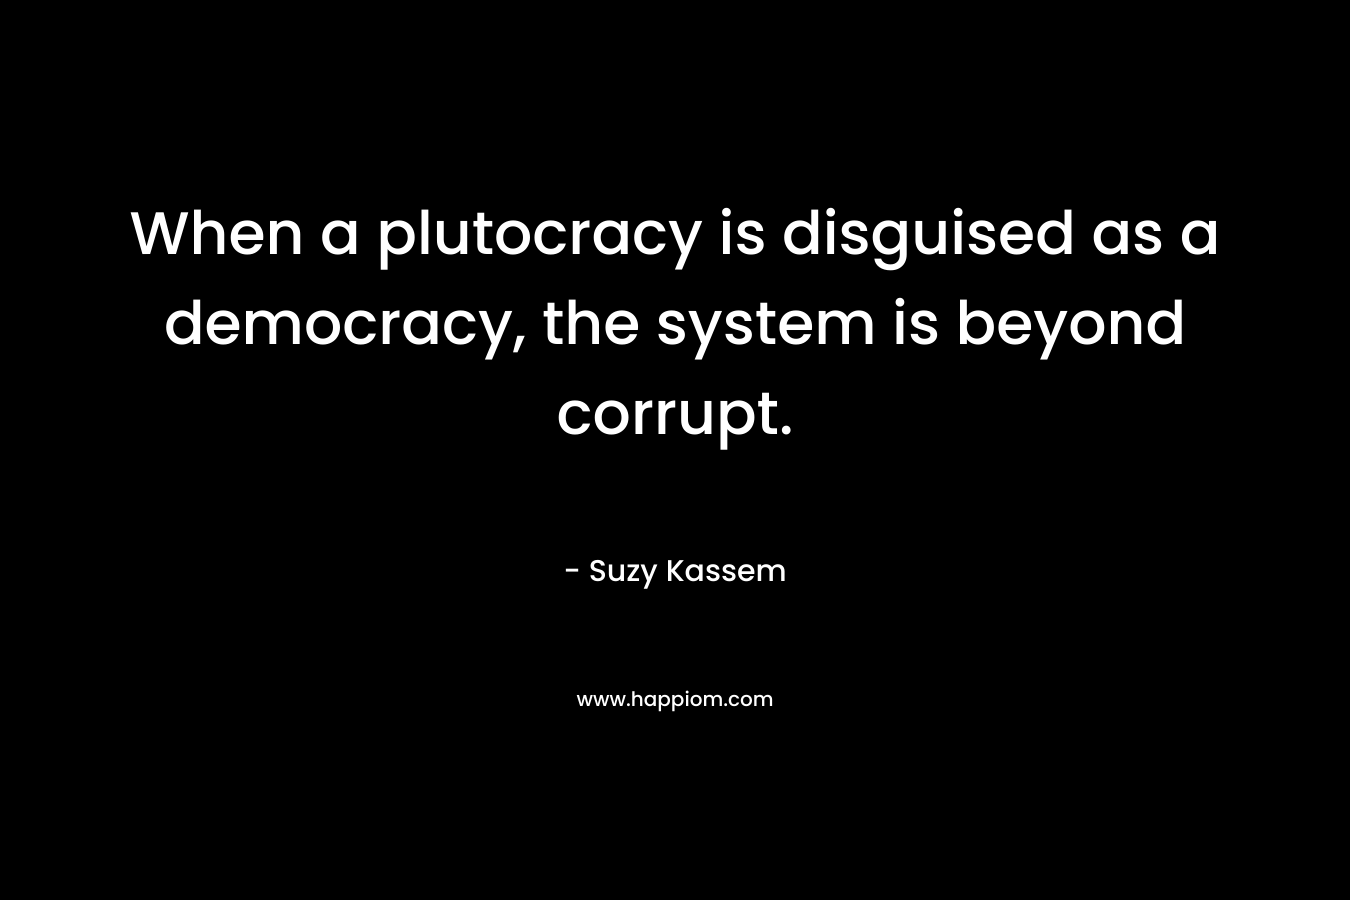 When a plutocracy is disguised as a democracy, the system is beyond corrupt.